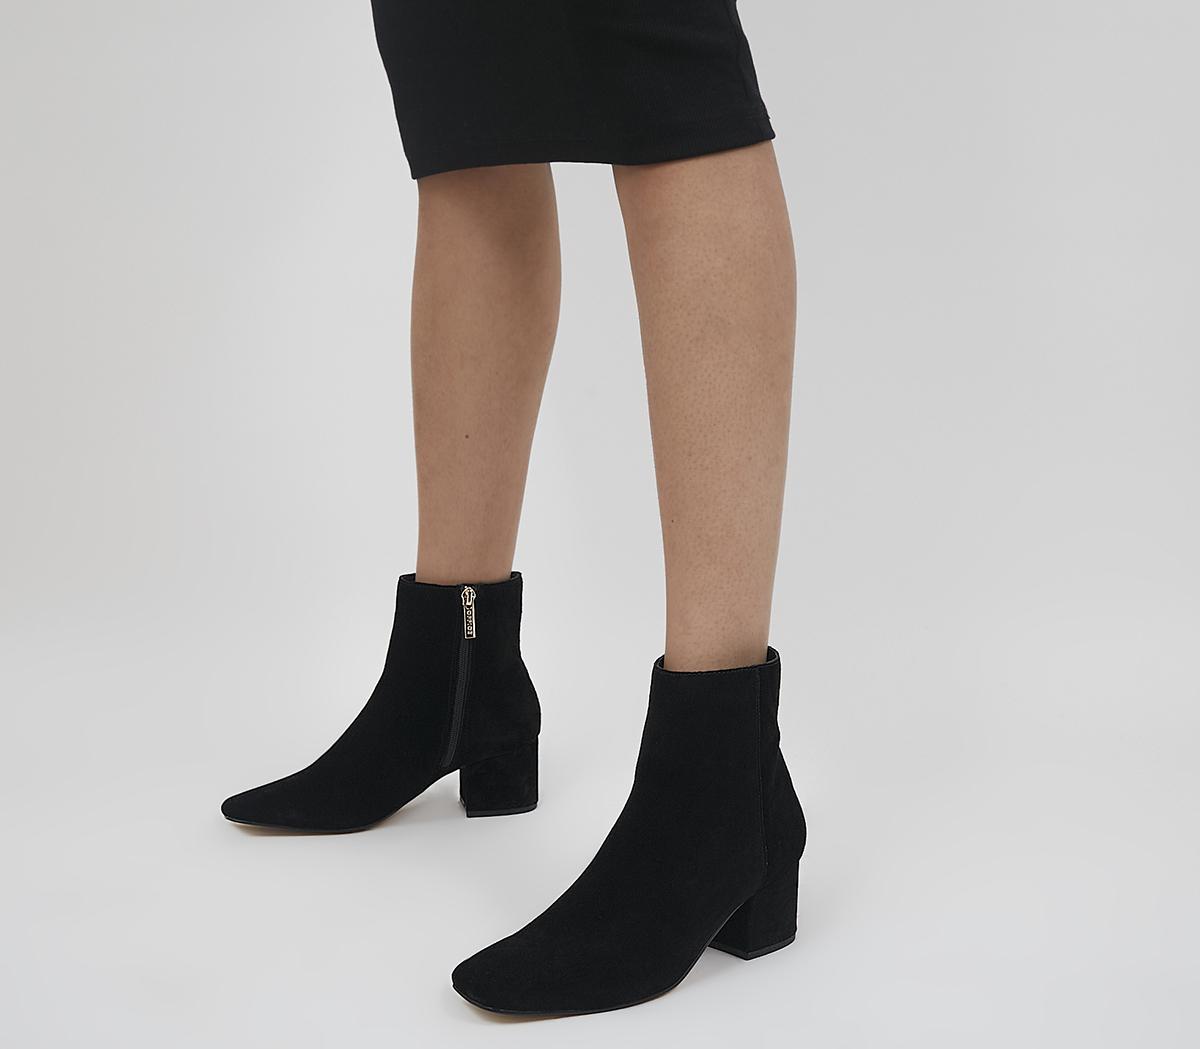 OFFICEAstrid Square Toe Mid Block Ankle BootsBlack Suede